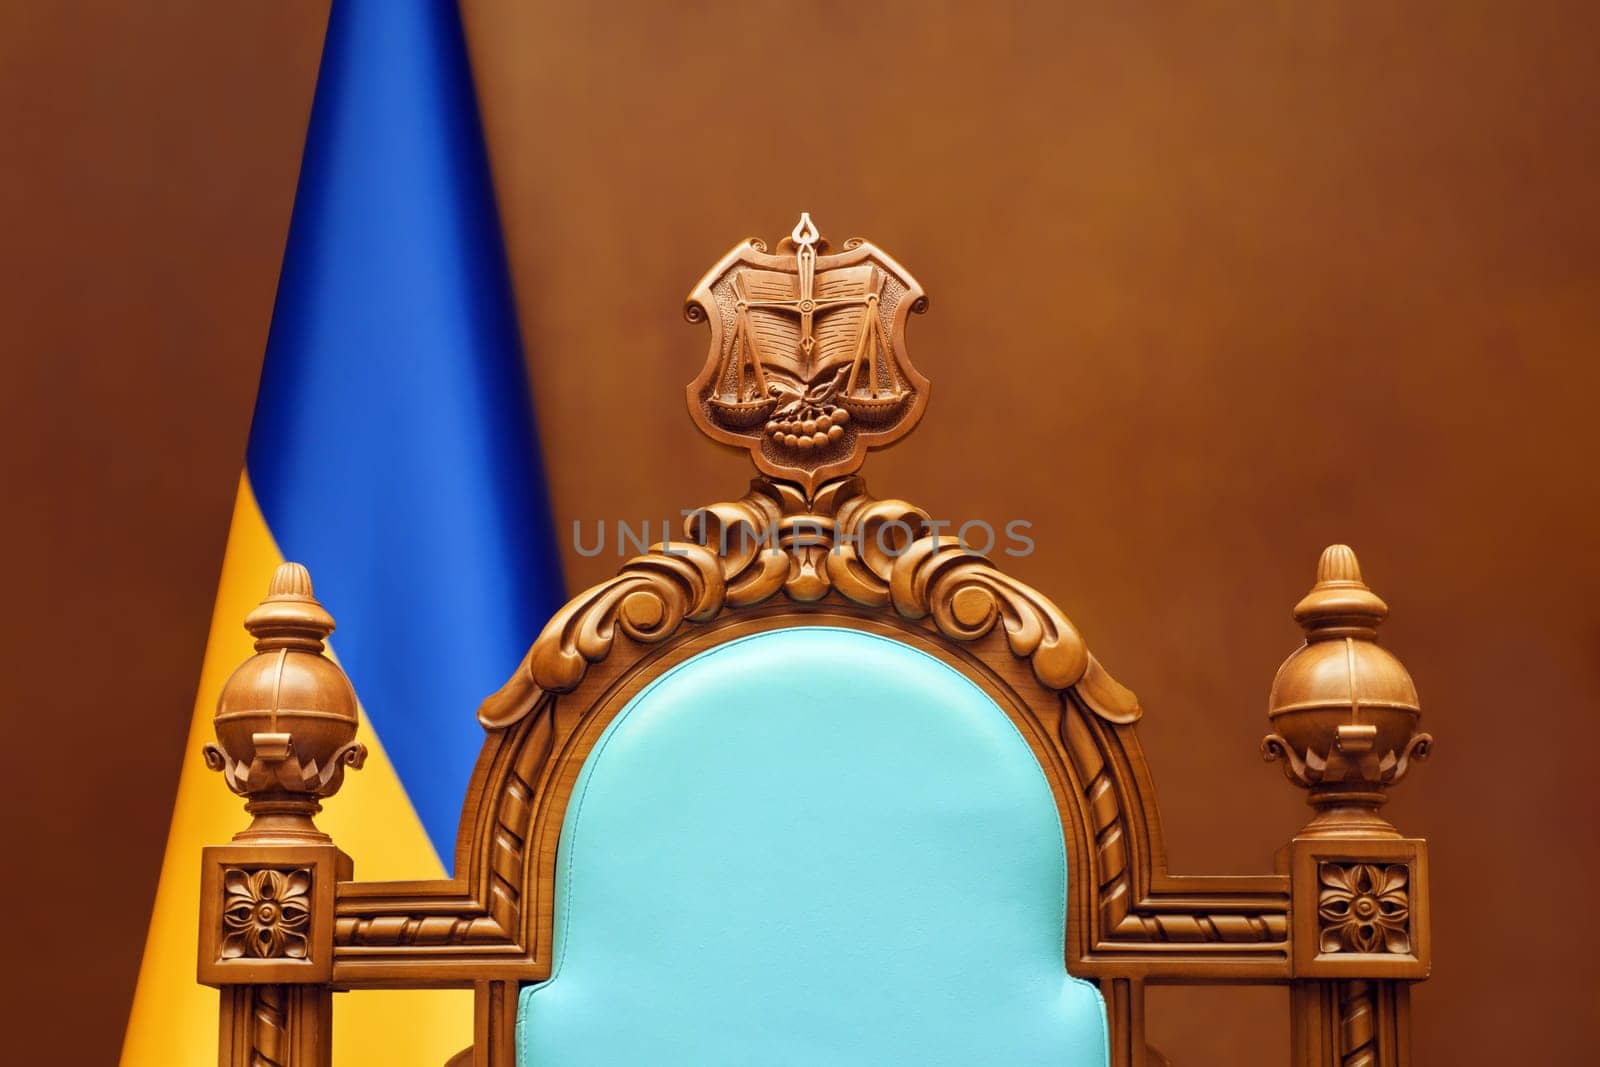 Empty chair judge Ukraine flag in courtroom background. Constitutional Court of Ukraine law justice system. Trial court scales of justice symbol Ukraine justice reform